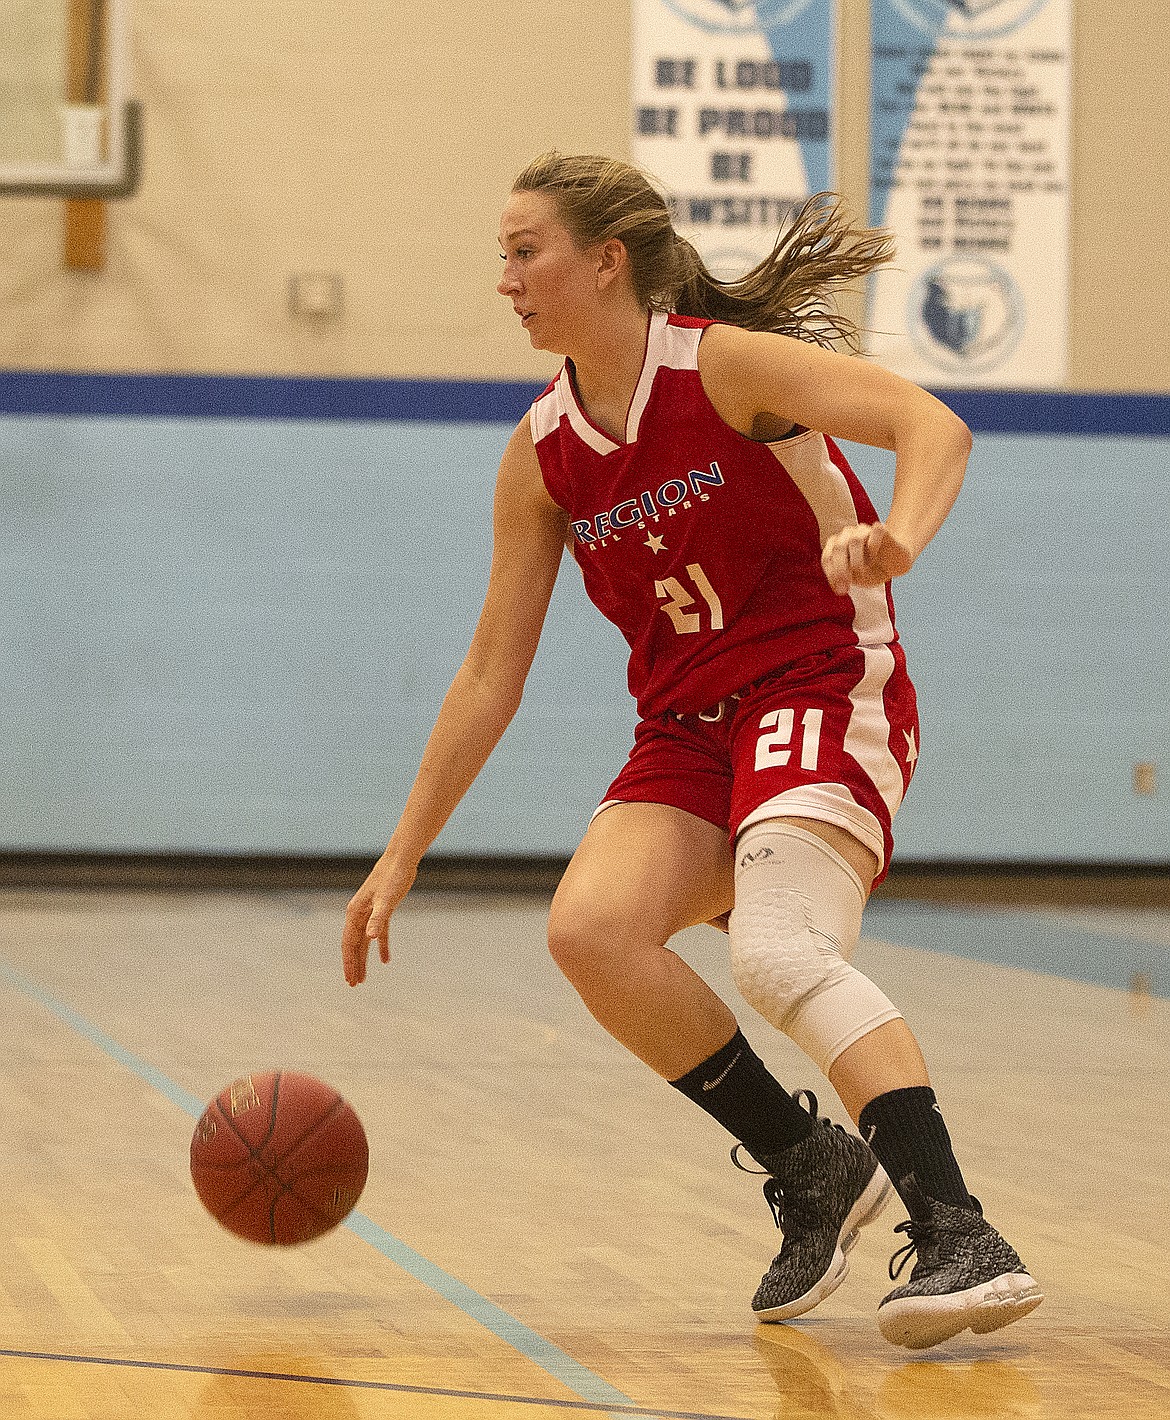 Grace Kirscher of Sandpoint High dribbles the ball and jukes around a Metro All-Star defender.